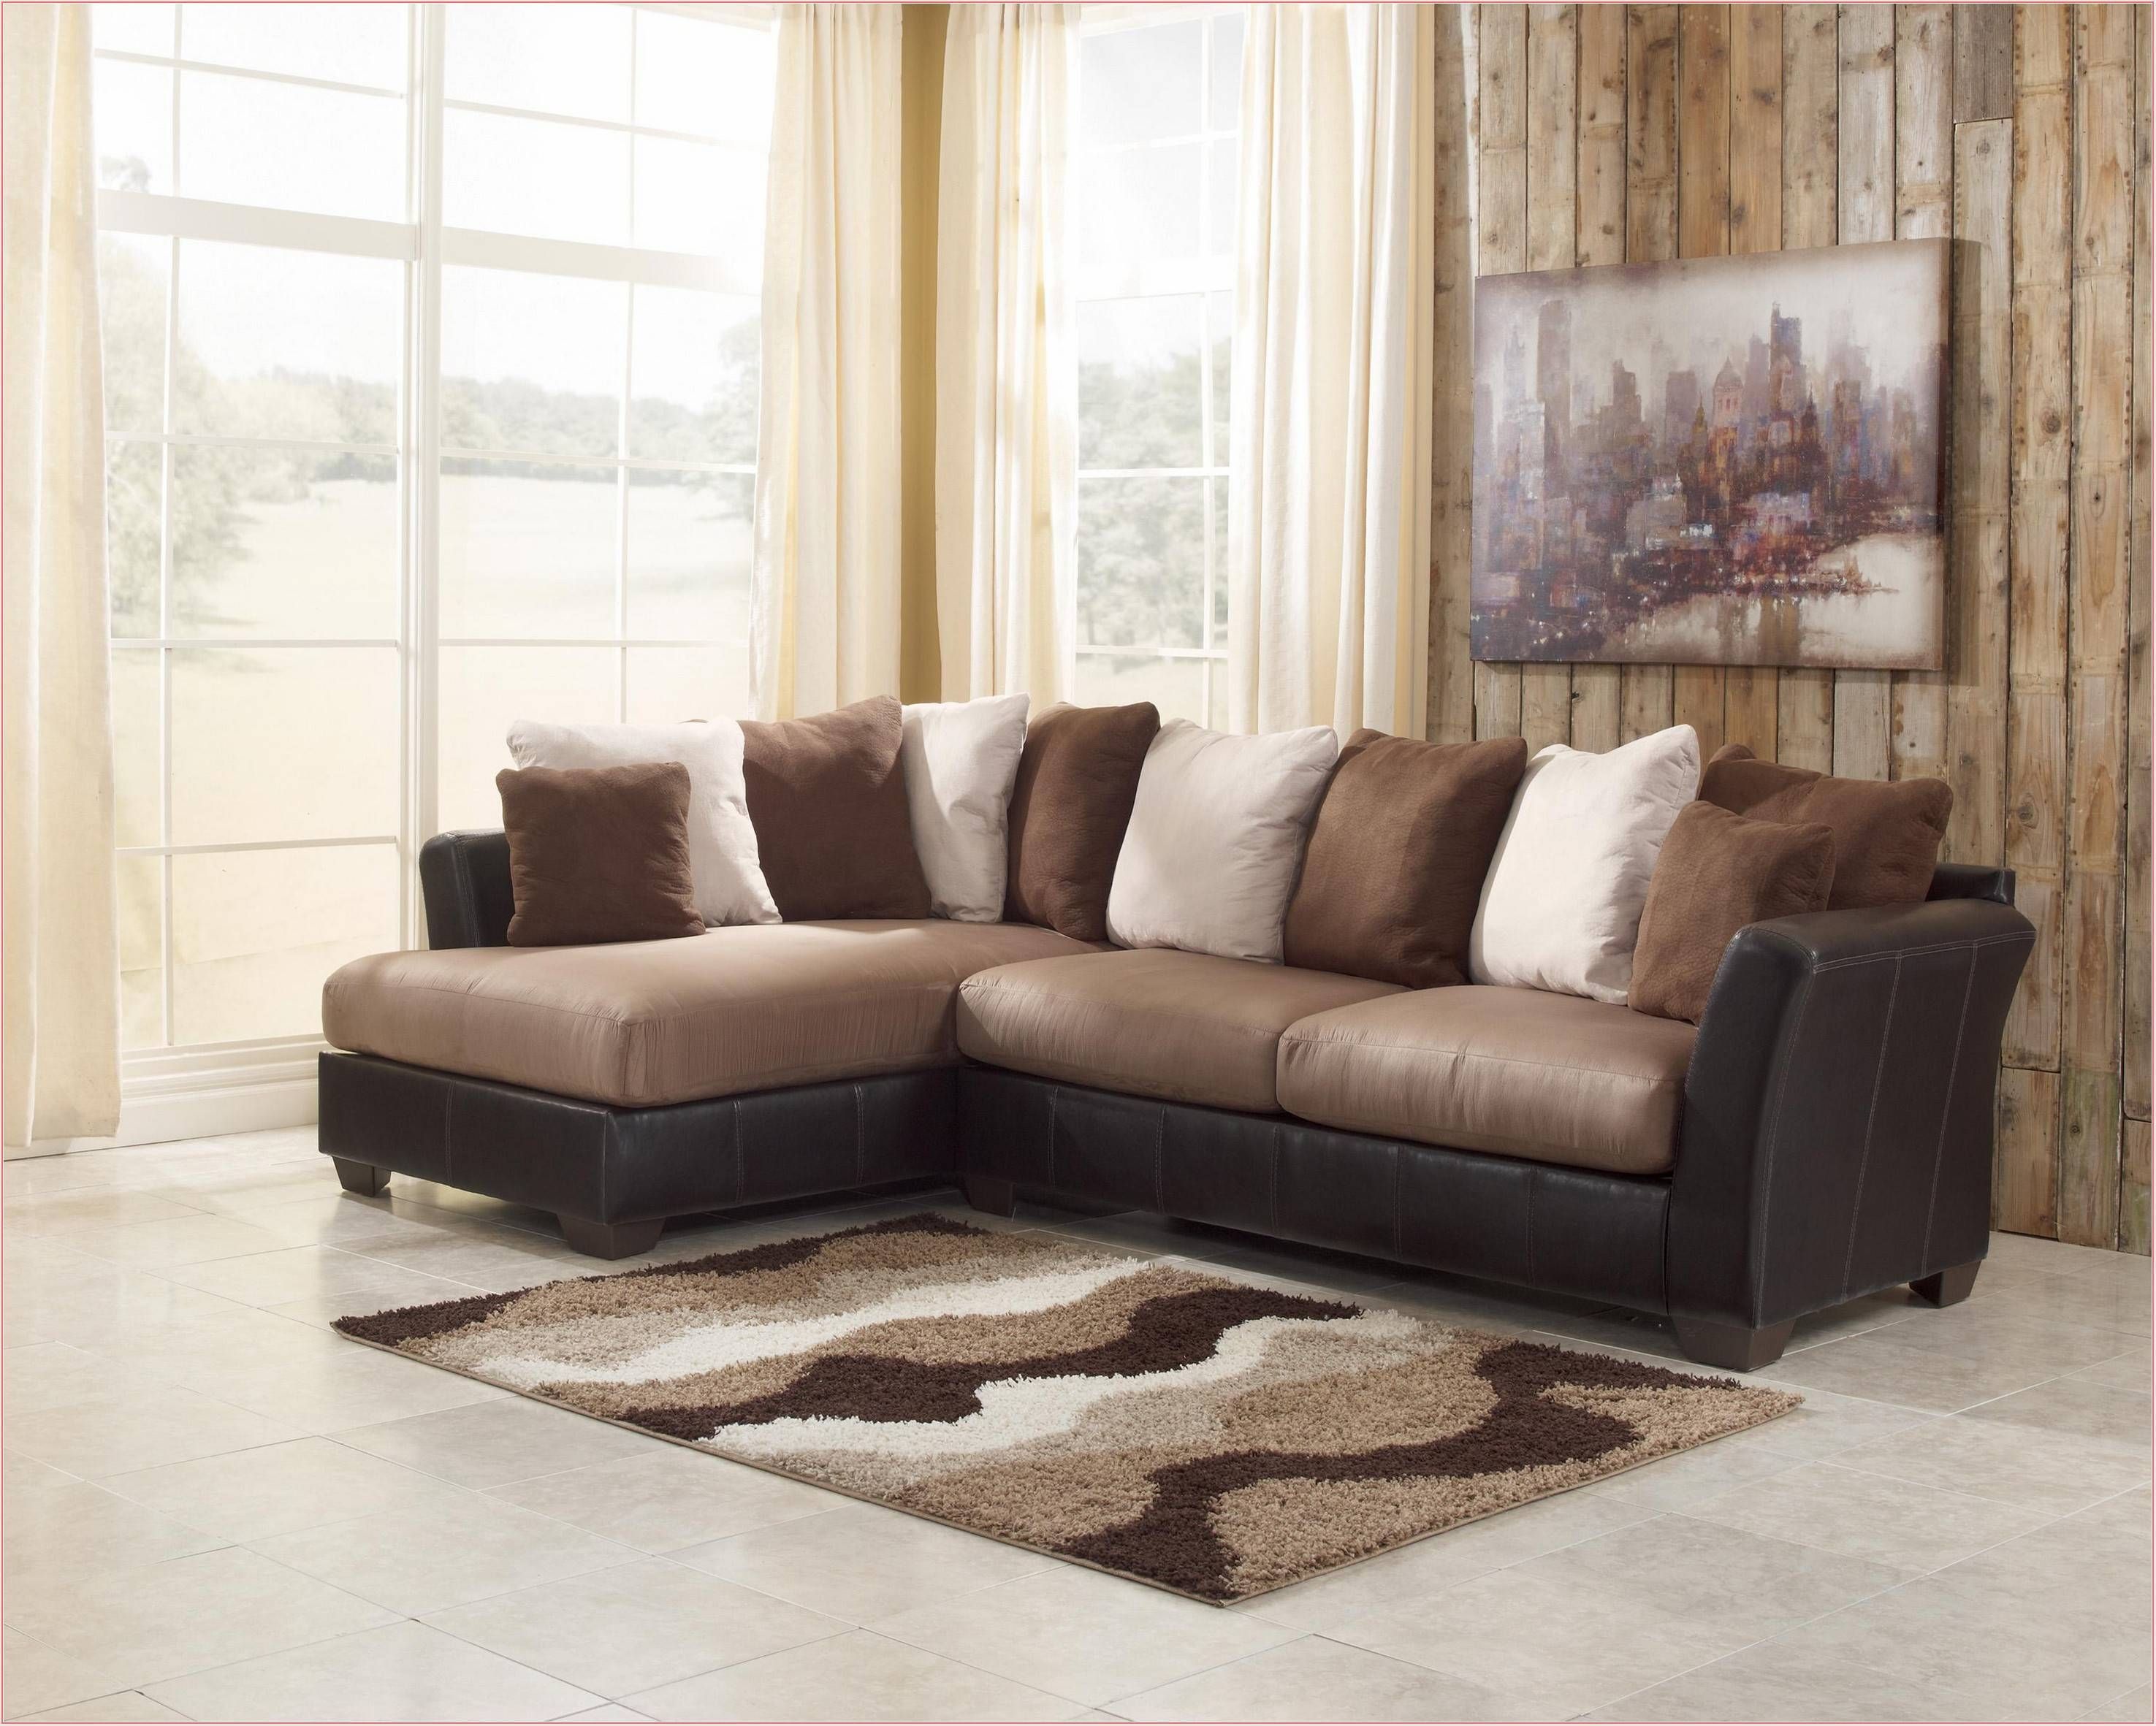 Beautiful Sectional Sofas Under 600 78 On Sectional Leather Sofas Throughout Sectional Sofas Under 600 (Photo 5 of 30)